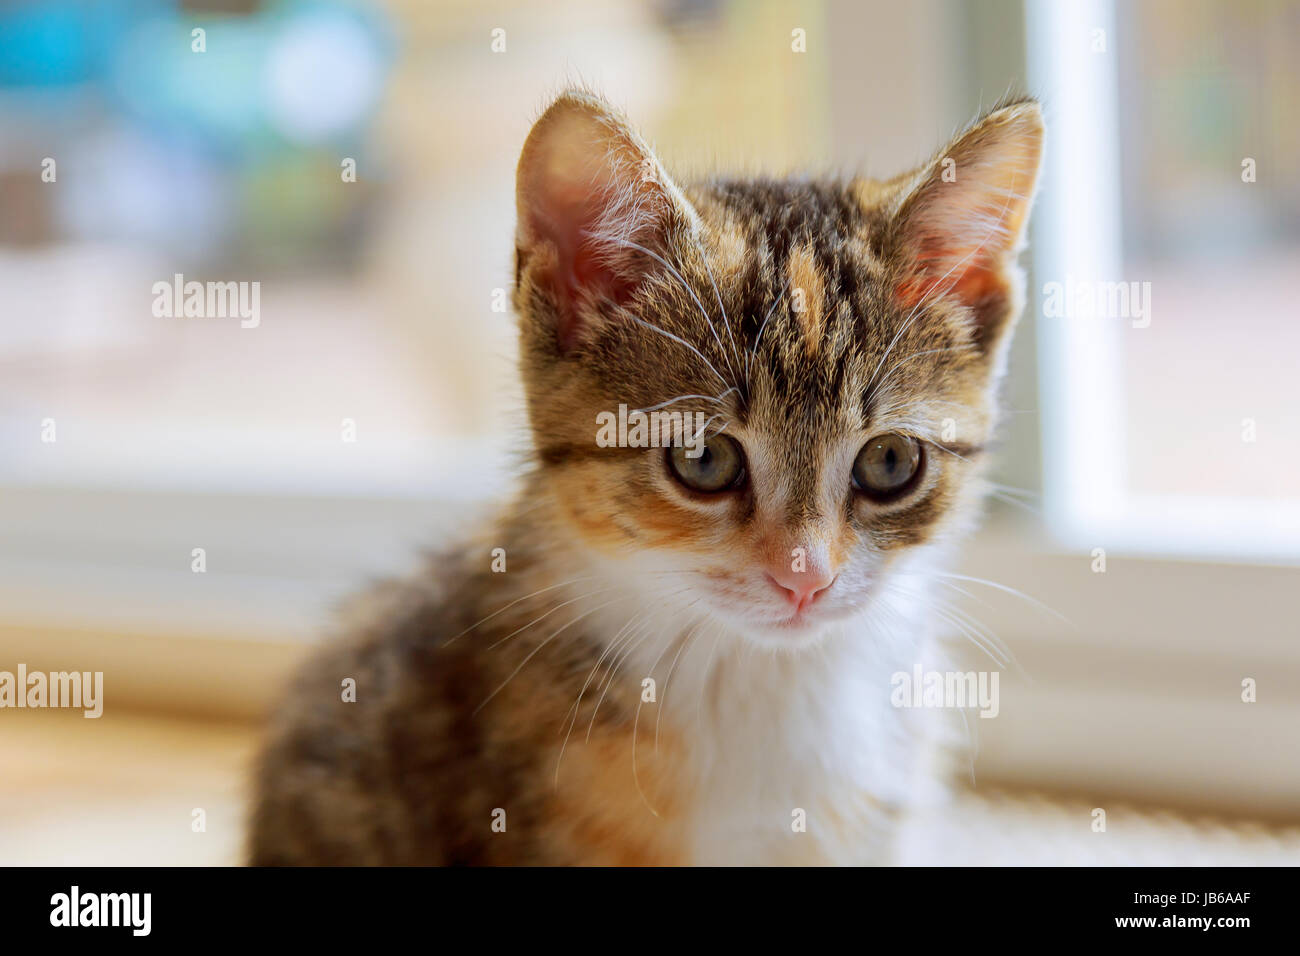 Cute orange kitten photographed with a specialty lens to get a soft dreamy effect. Stock Photo